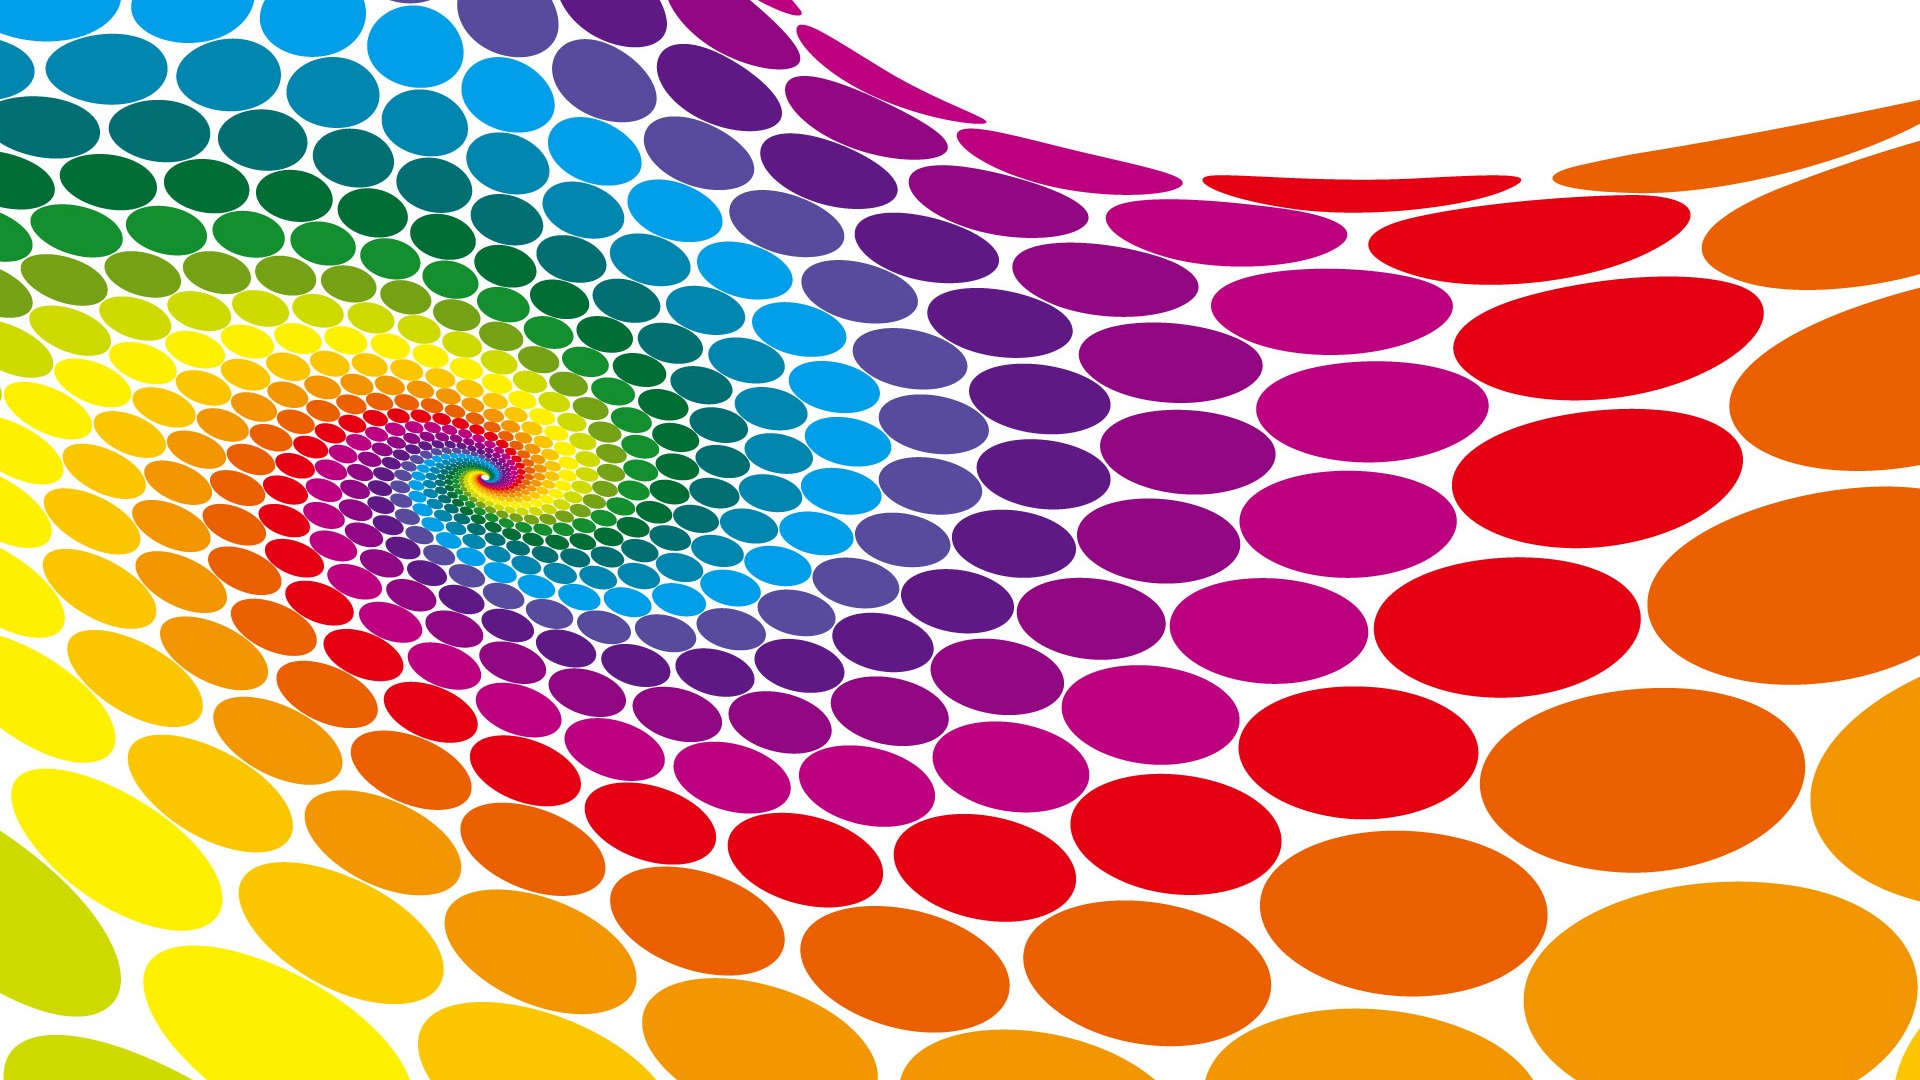 Colorful vector background wallpaper (3) #1 - 1920x1080